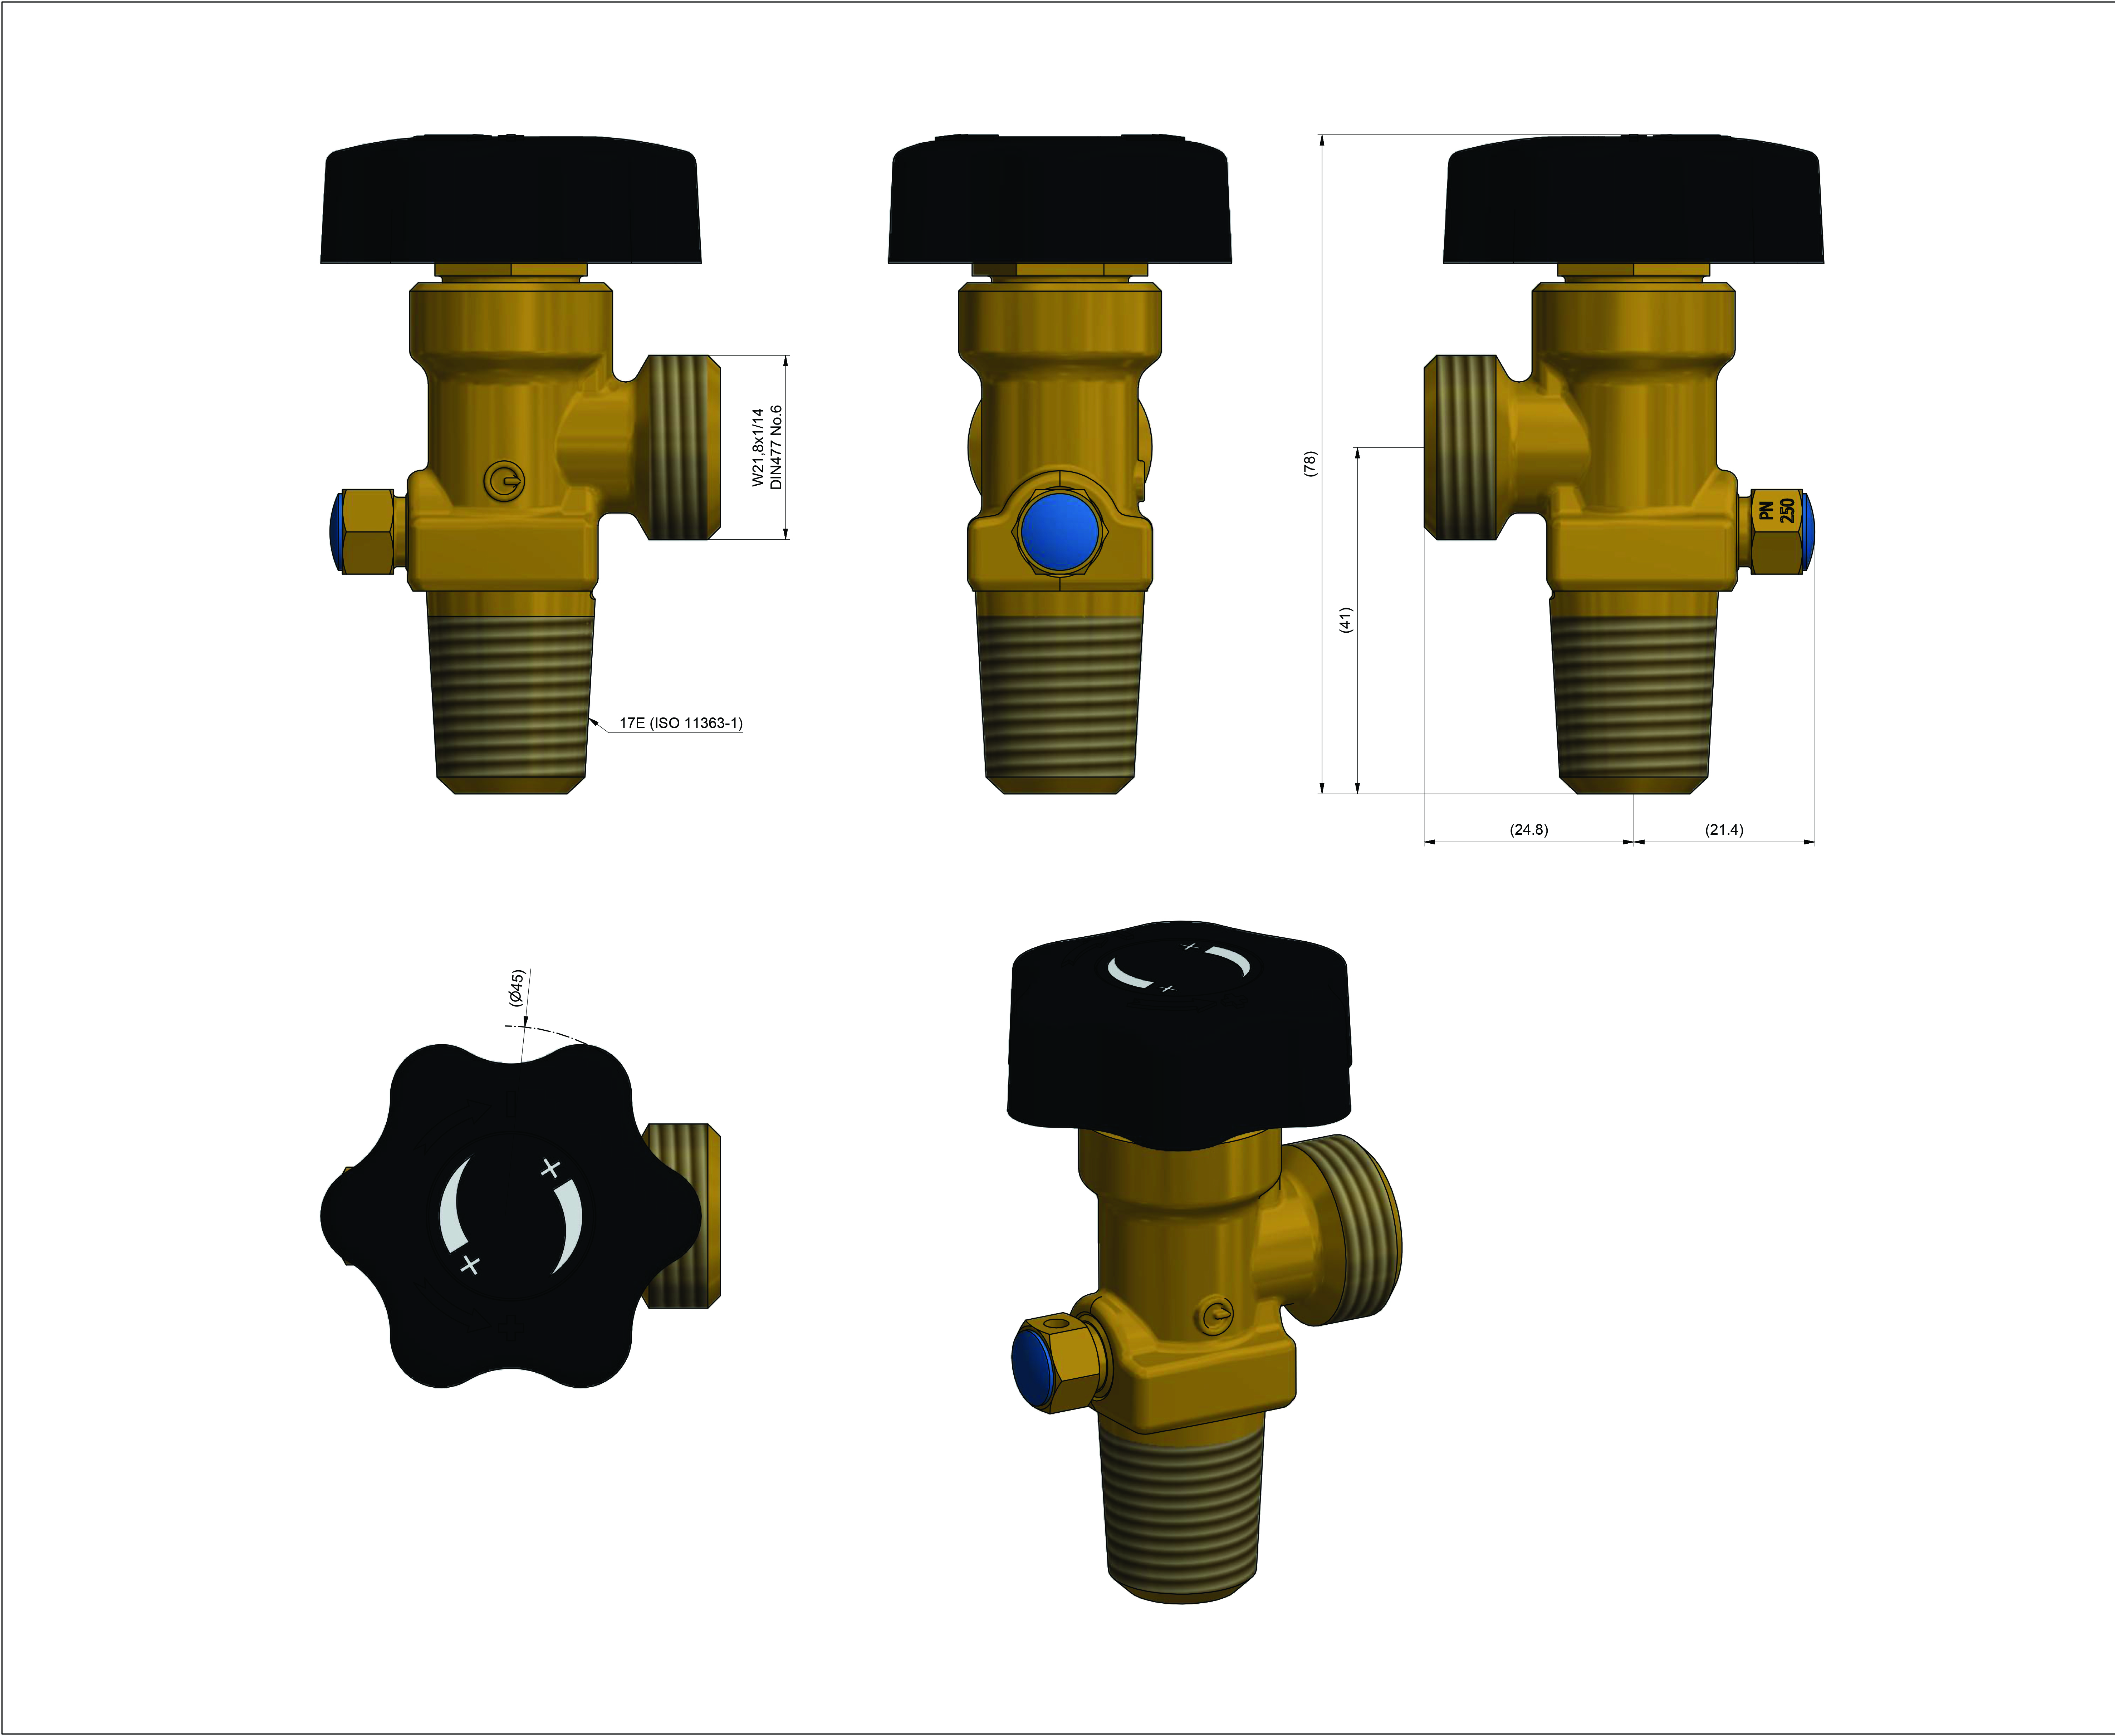 https://gcegroup.com/files/technical-drawings/INDUSTRIAL/Drawing%20CO2%20valve.jpg